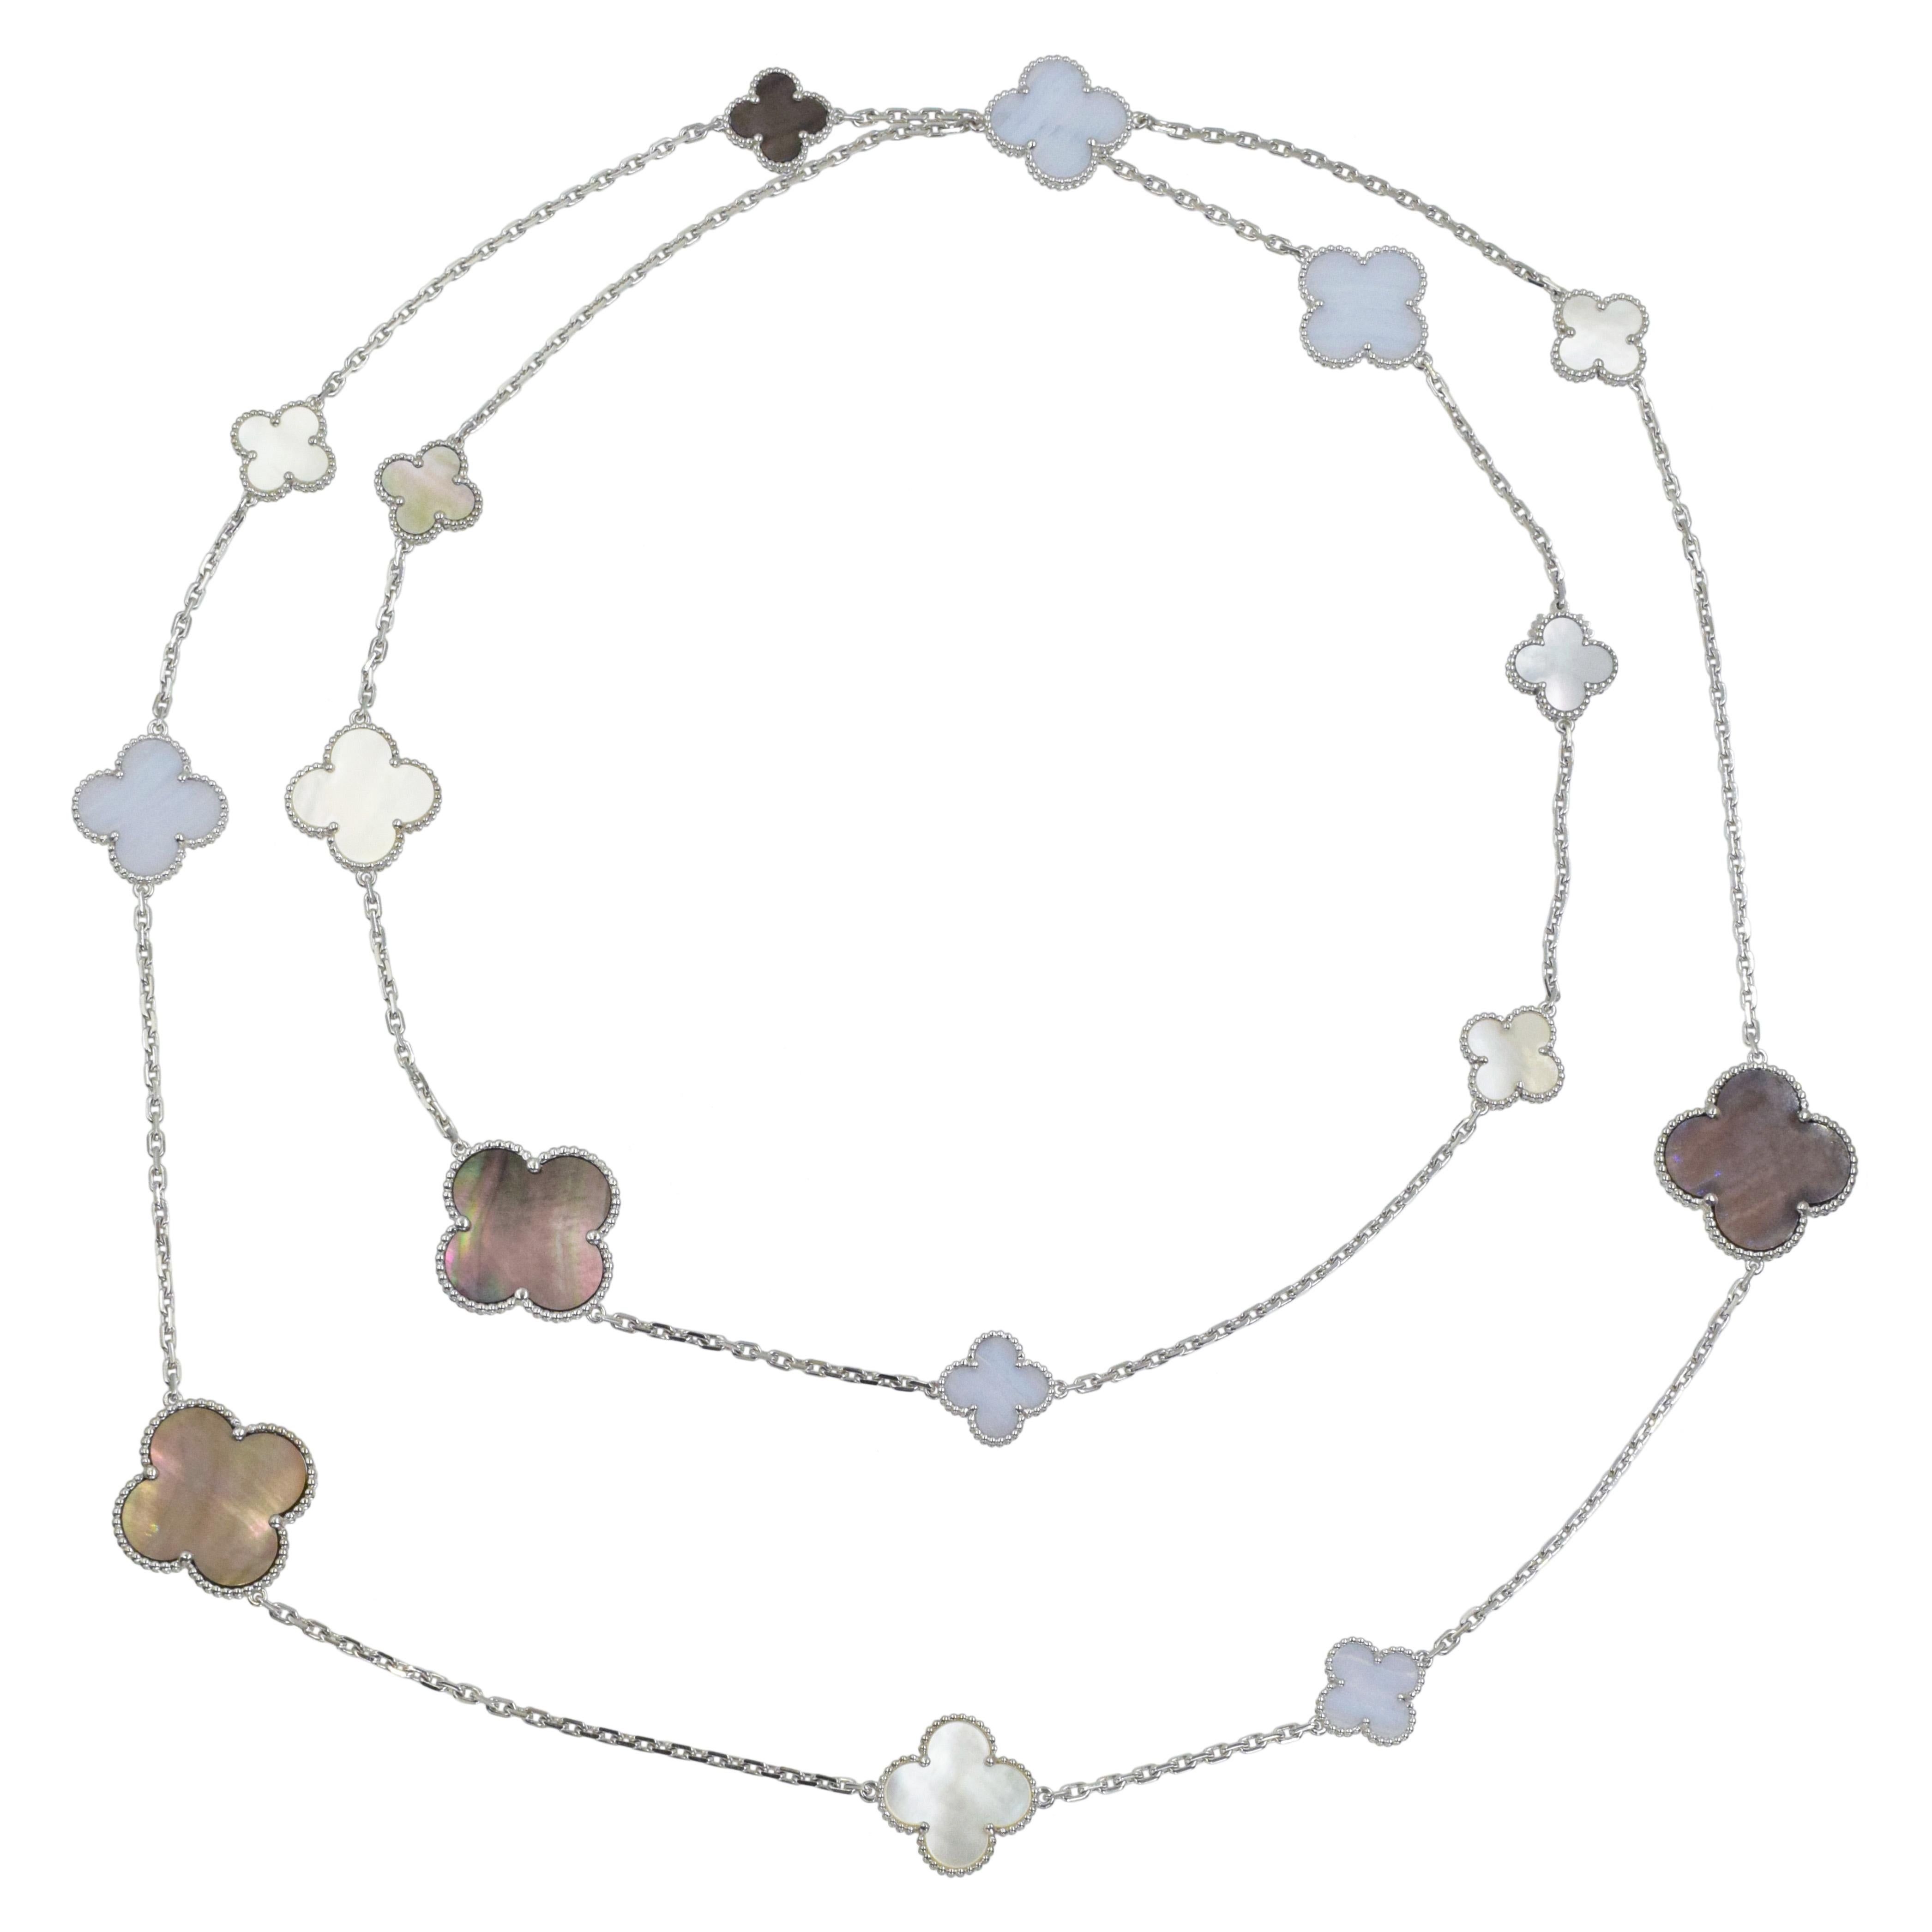 Van Cleef & Arpels MOP and Chalcedony 16 motif necklace in 18k white gold. The necklace features  5 gray  Mother of Pearl clover motifs, 6 white Mother of Pearl clover motifs, and 5 blue chalcedony clove  motifs. Motifs measure: 15mm, 20mm and 26mm.